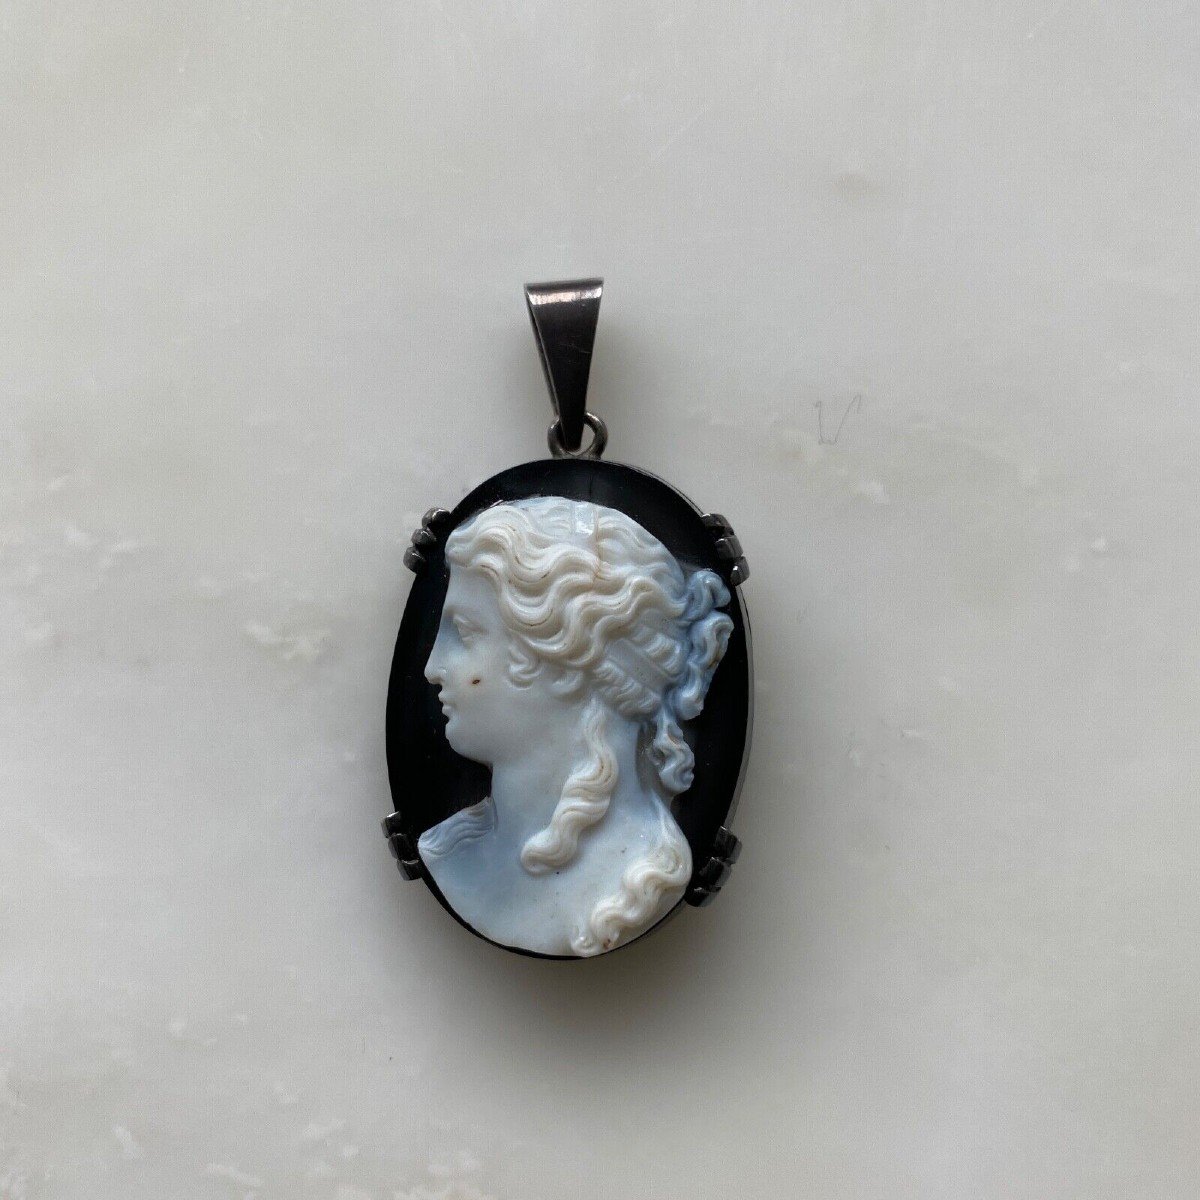 Rare Antique Cameo Of A Woman's Profile On A Black Background